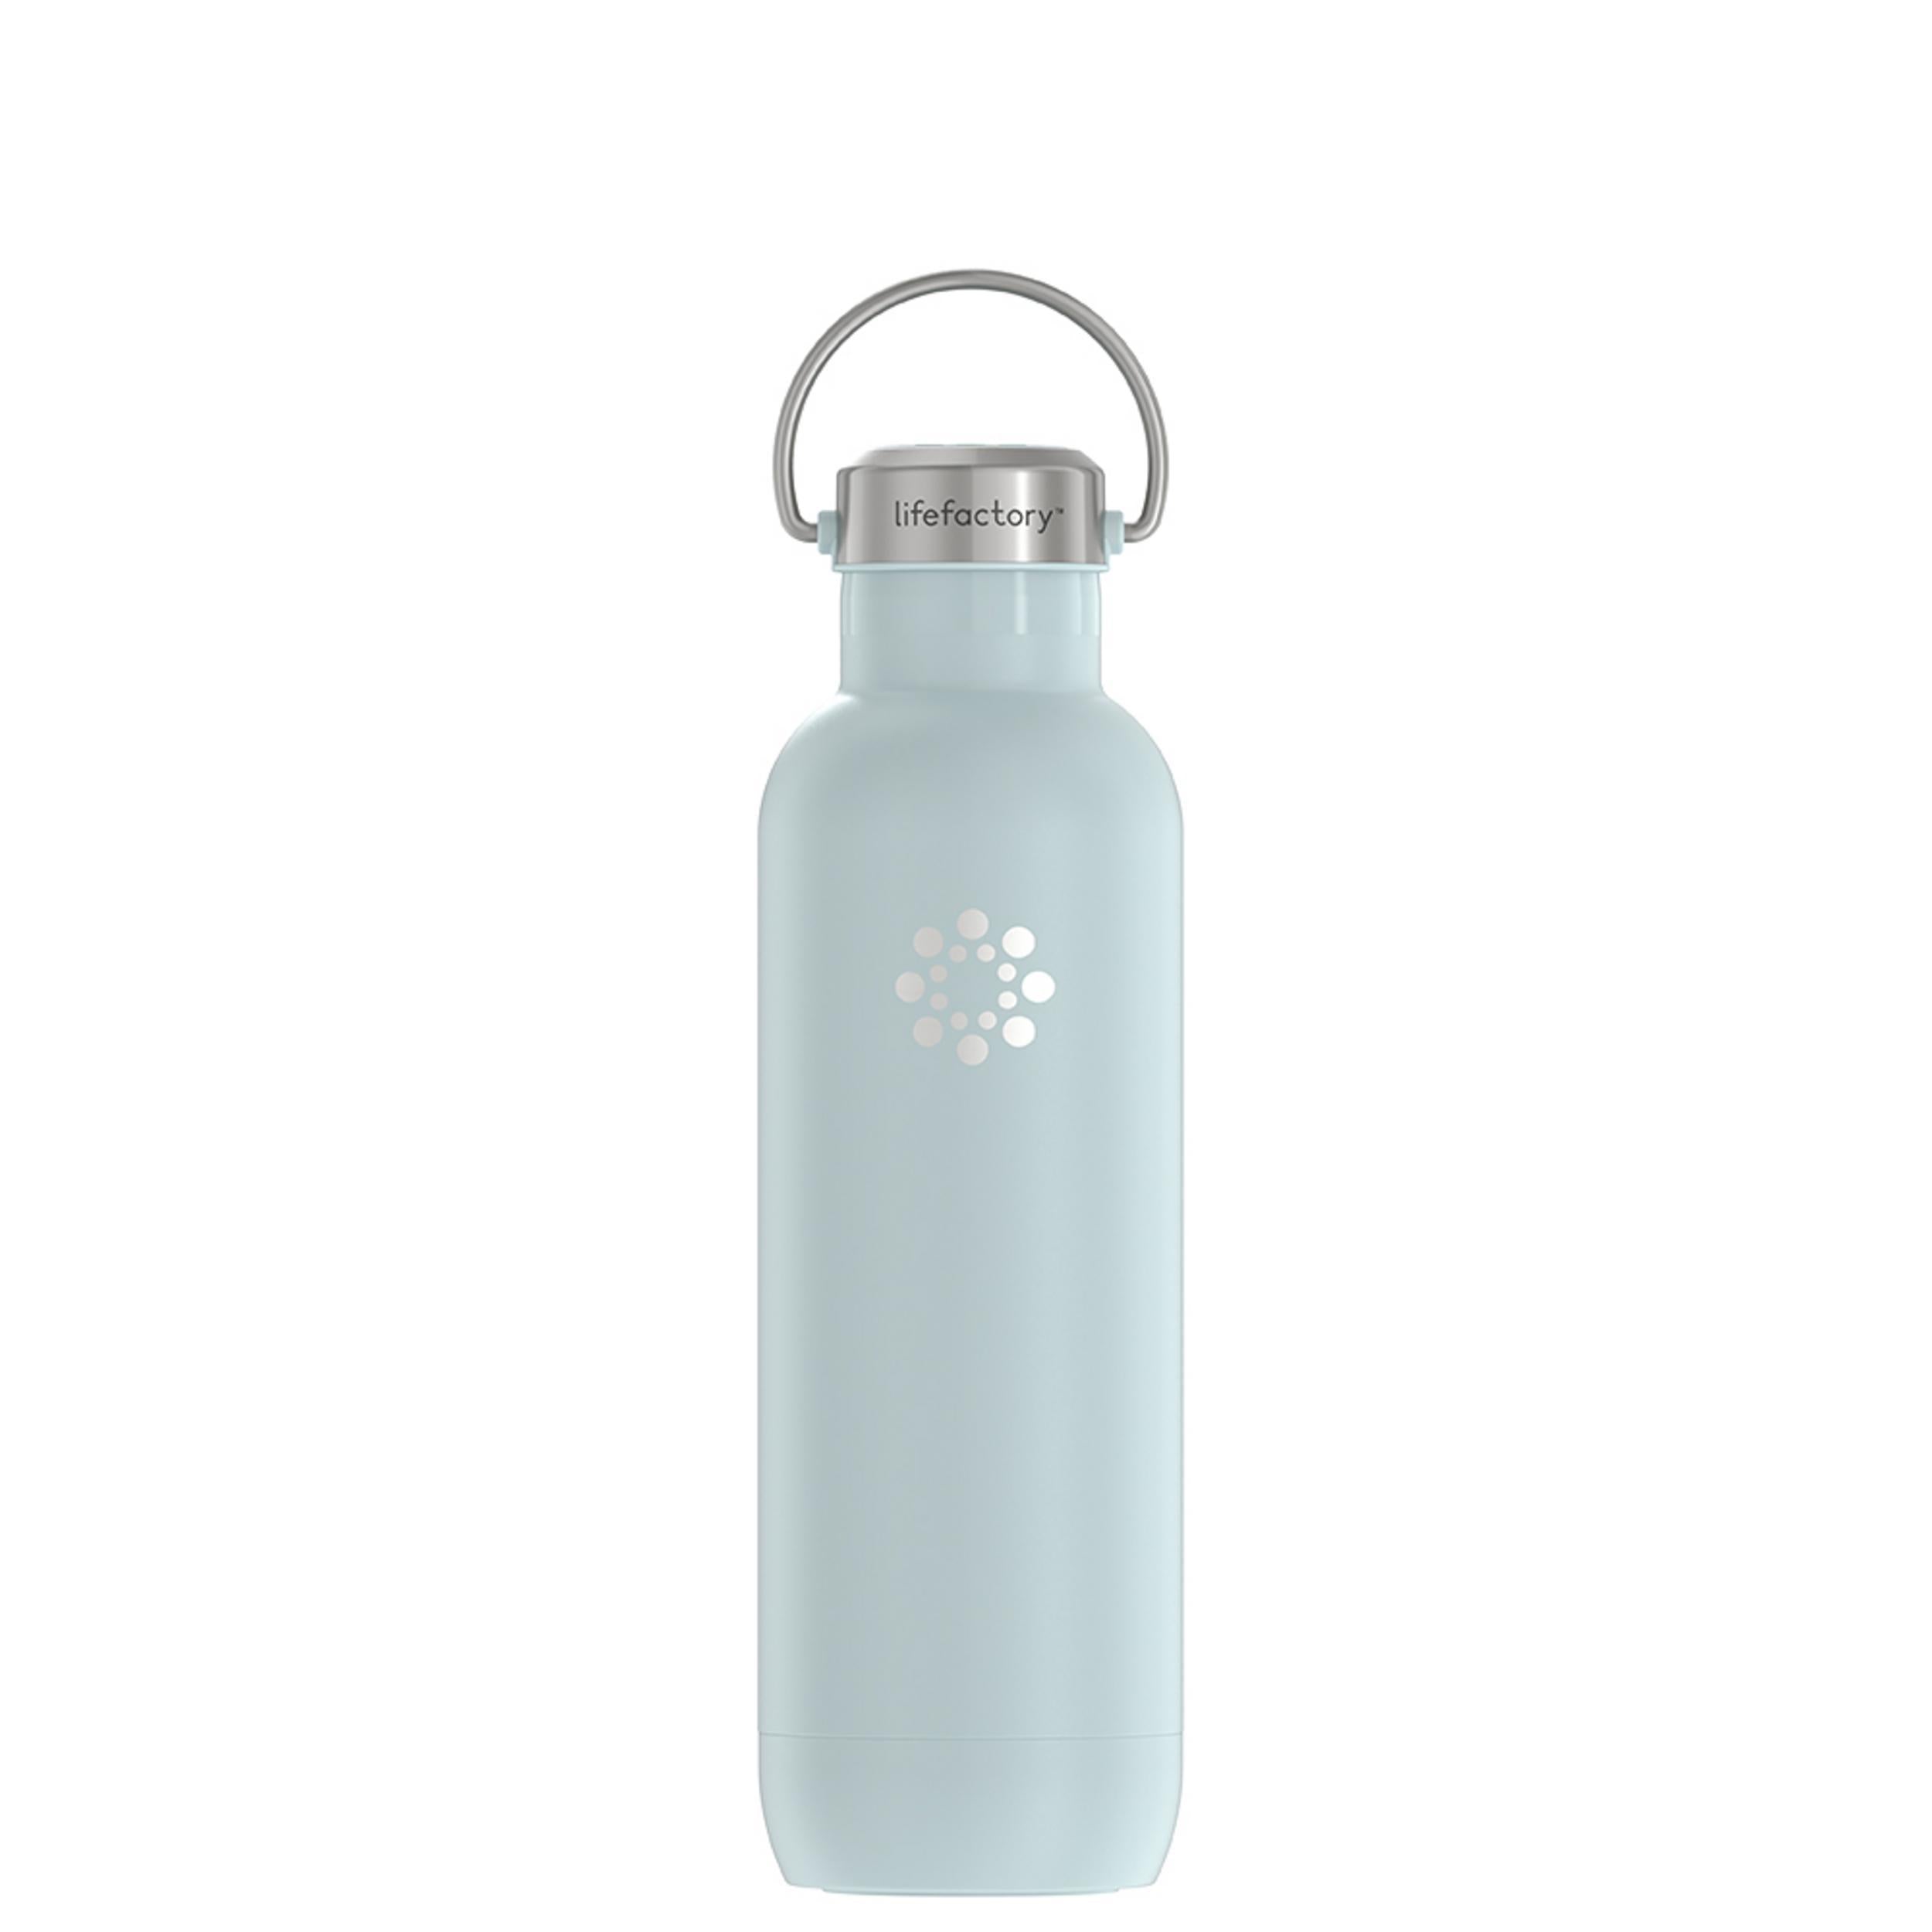 Hydro Flask Vacuum Insulated Stainless Steel Water Bottle 24oz